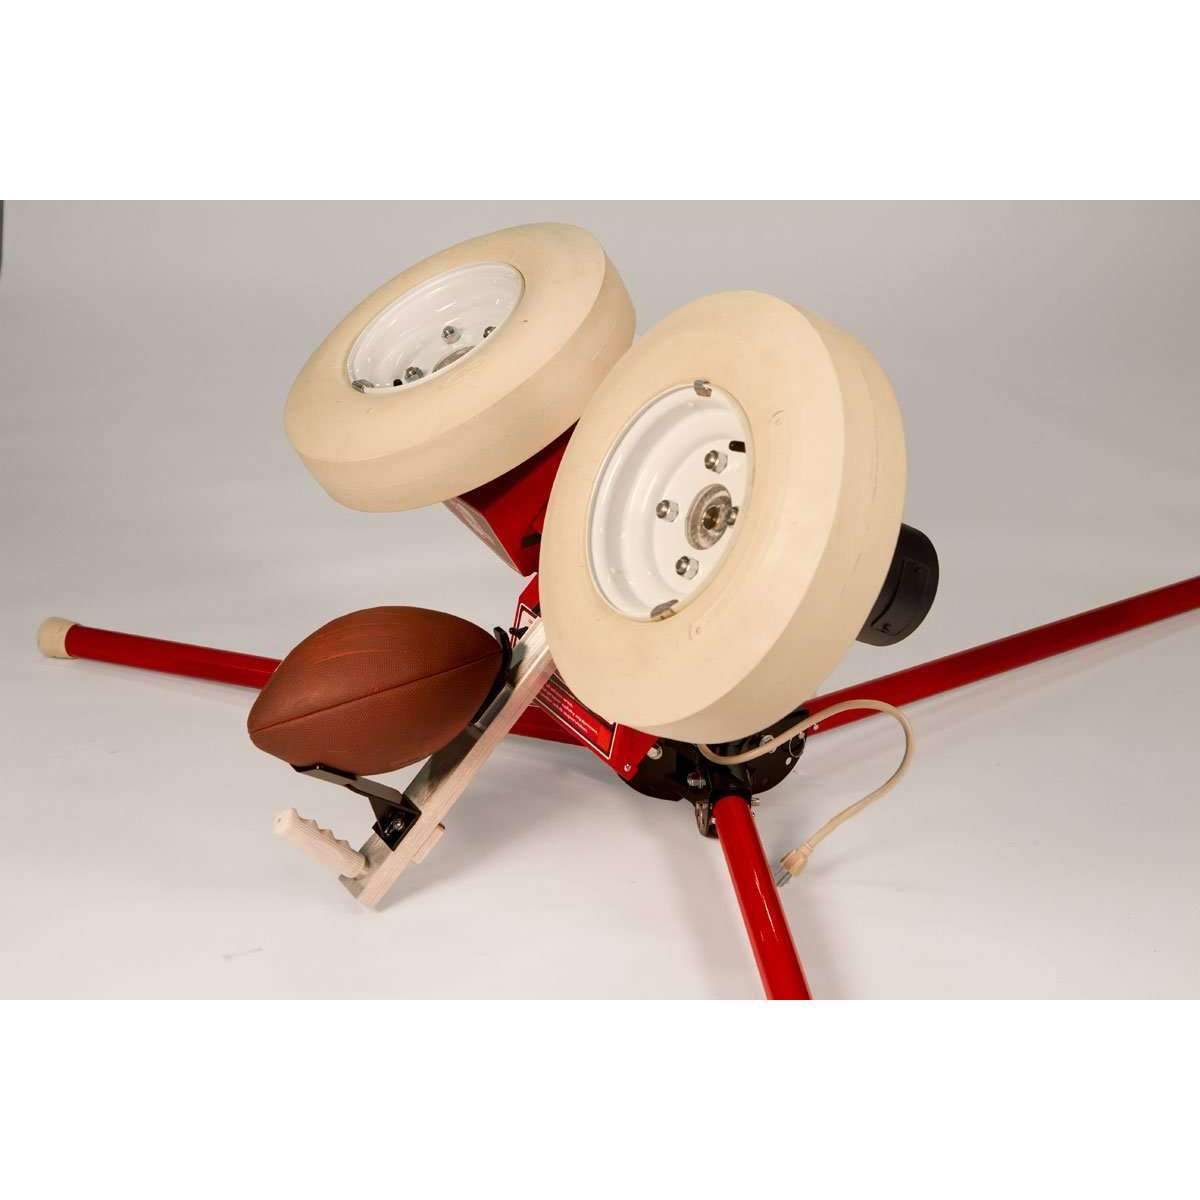 First Pitch Quarterback Football Throwing Machine - Pitch Pro Direct